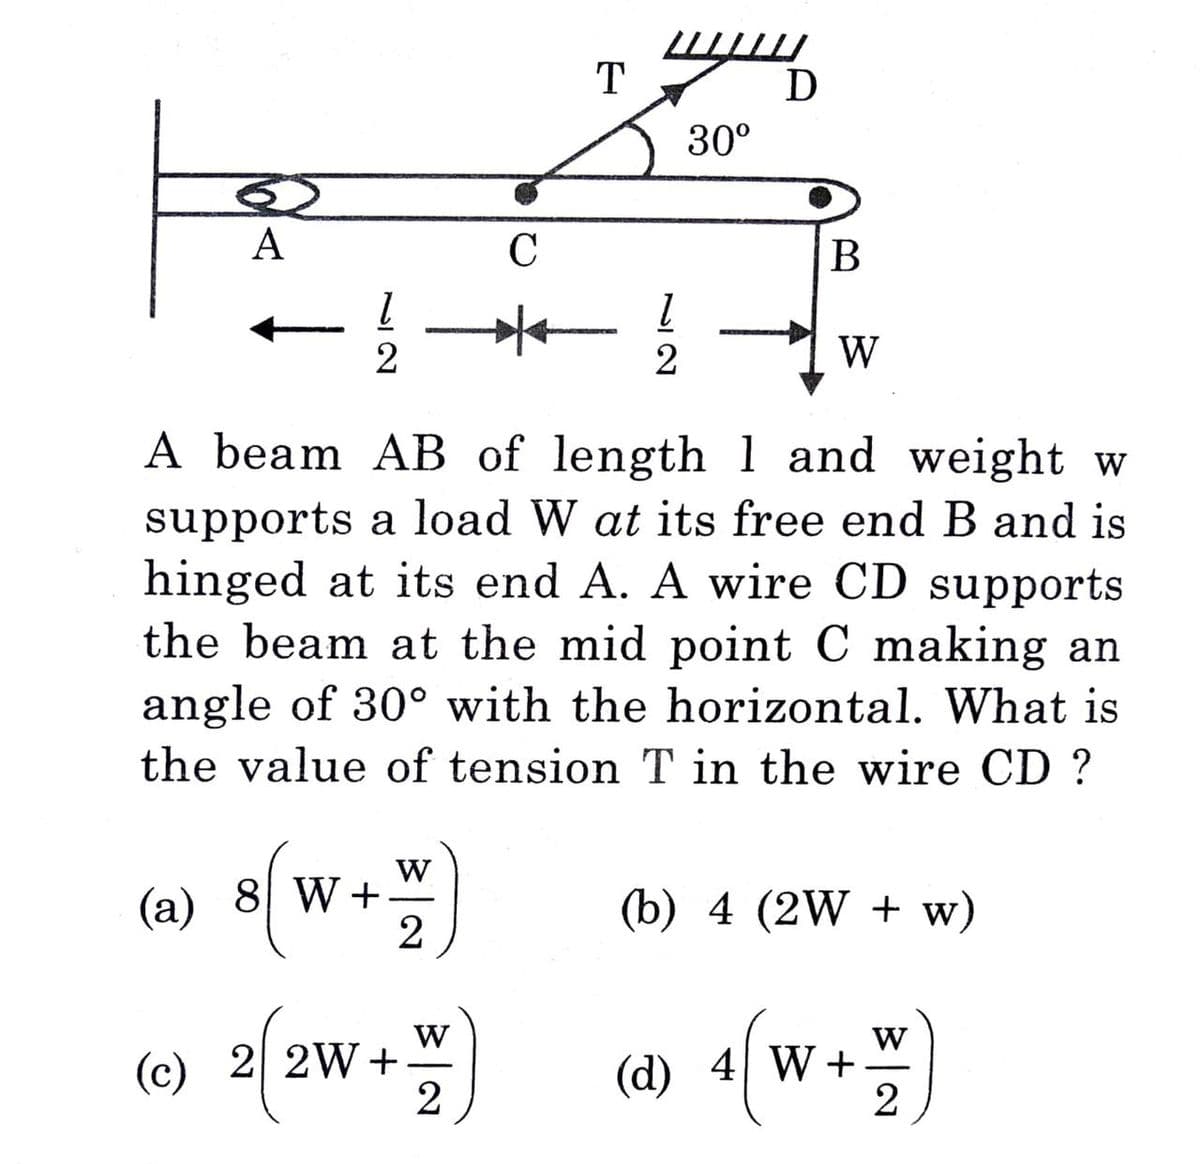 A
72
2
(a) 8 W+
W
2
(c) 2 2W+
с
W)
2
T
72
30⁰
A beam AB of length 1 and weight w
supports a load W at its free end B and is
hinged at its end A. A wire CD supports
the beam at the mid point C making an
angle of 30° with the horizontal. What is
the value of tension T in the wire CD?
D
B
W
(b) 4 (2W + w)
(d) 4 W+
W
2